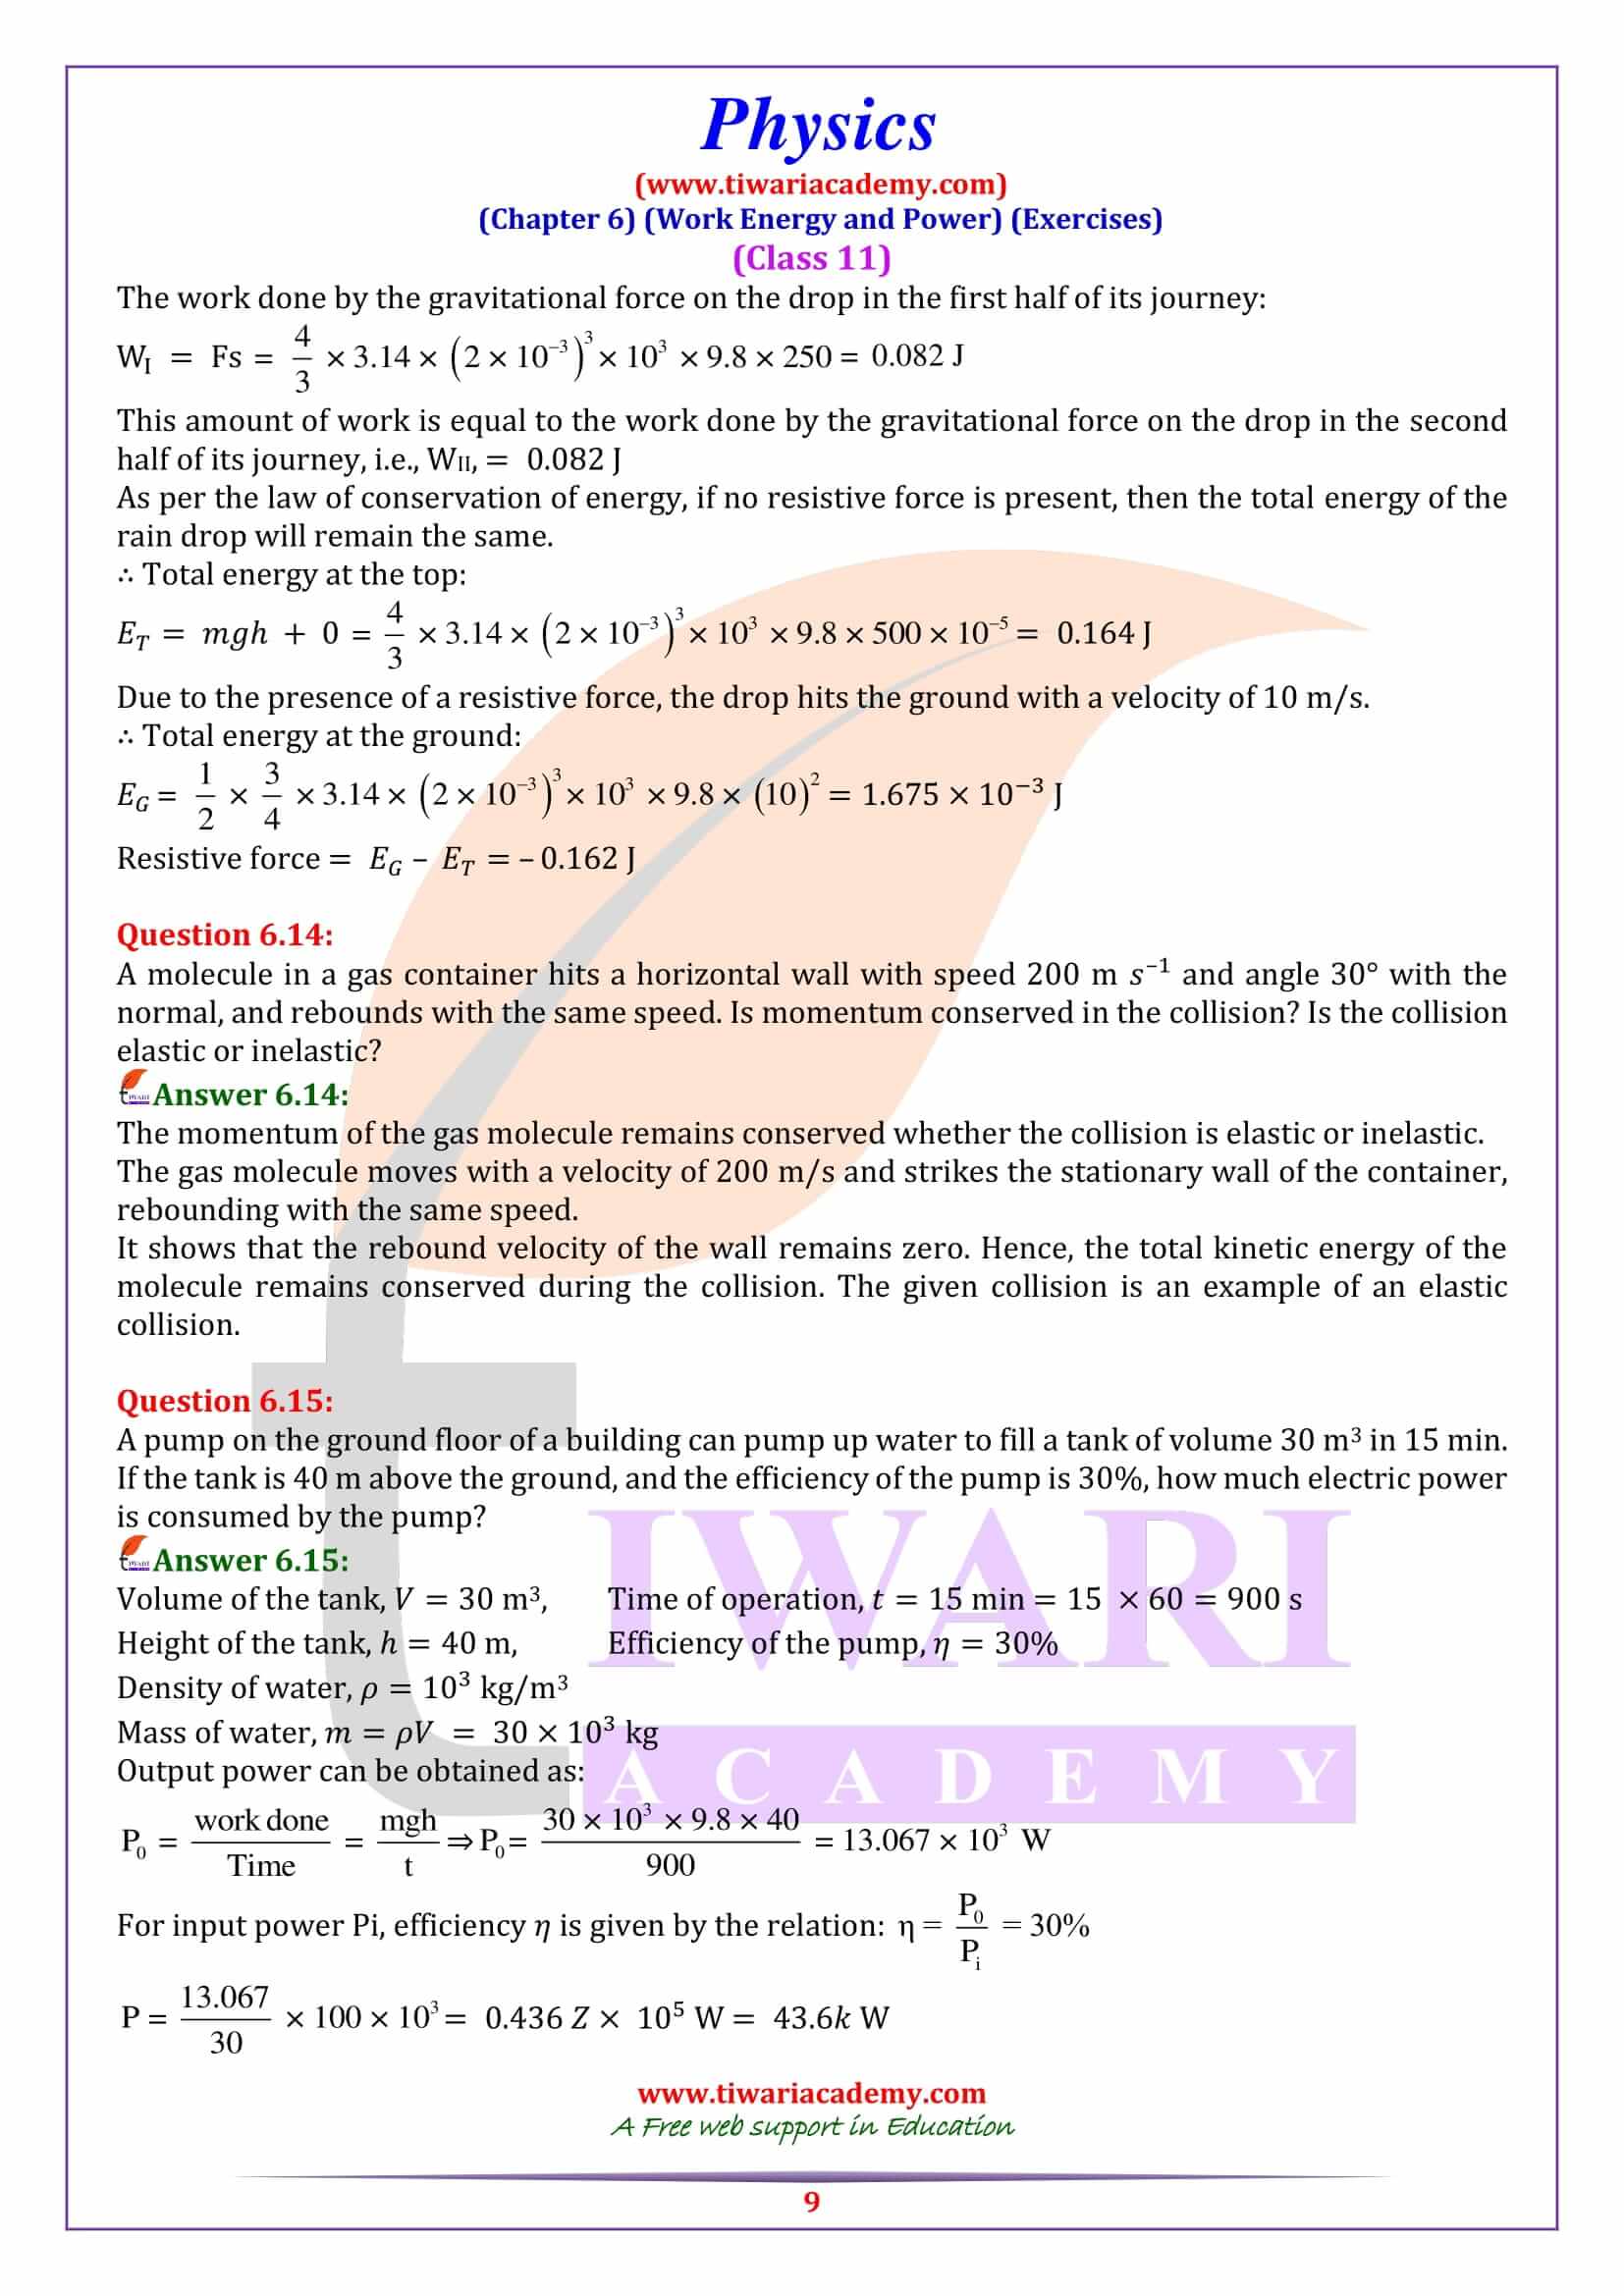 Class 11 Physics Chapter 6 Free download